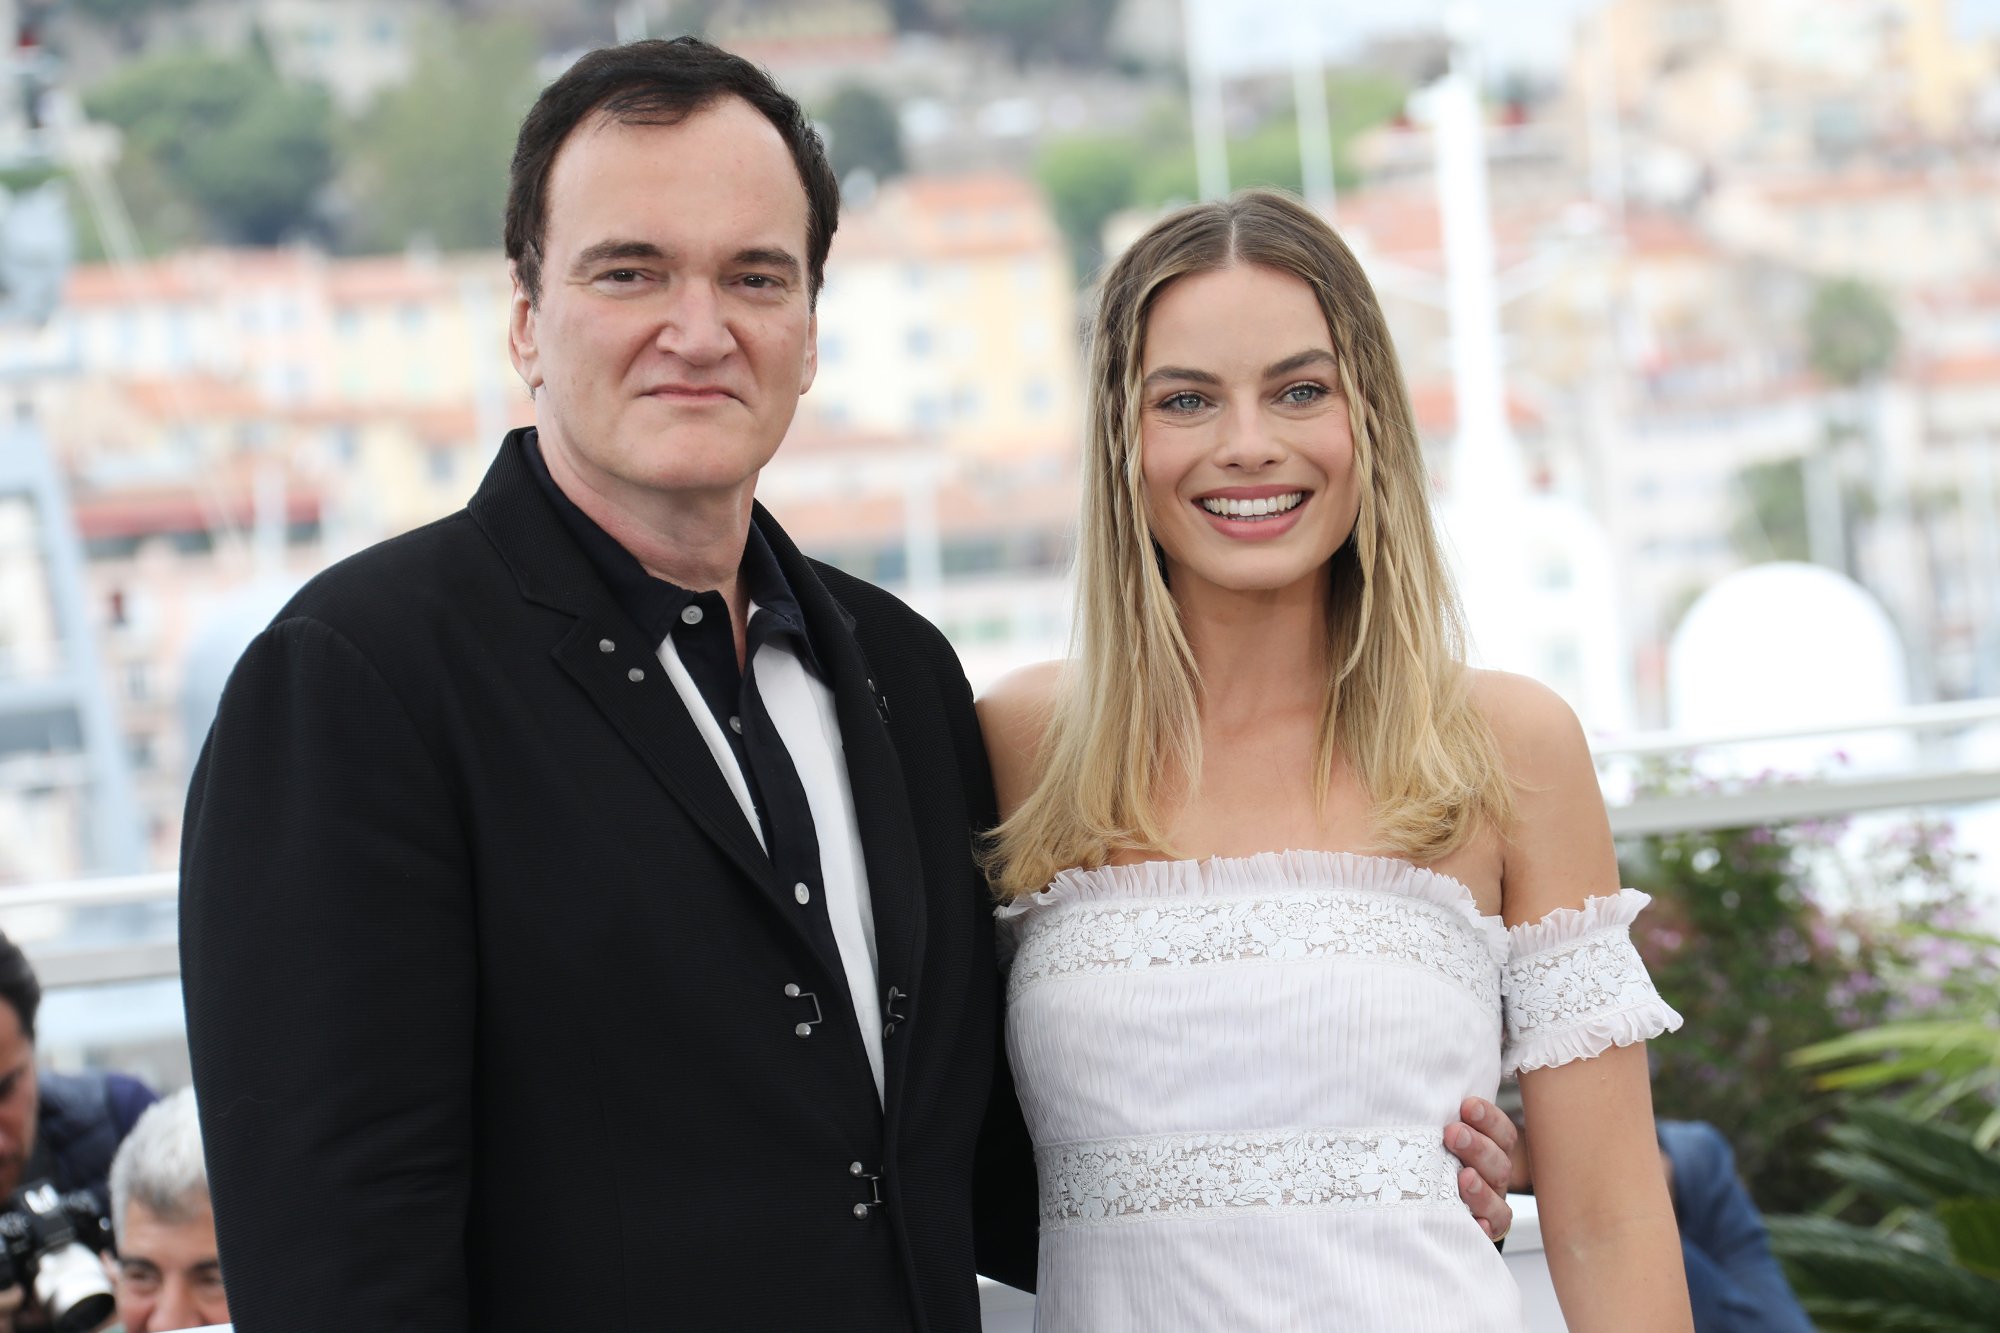 'Once Upon a Time in Hollywood' Quentin Tarantino and Margot Robbie dressed up for the photocall at Cannes